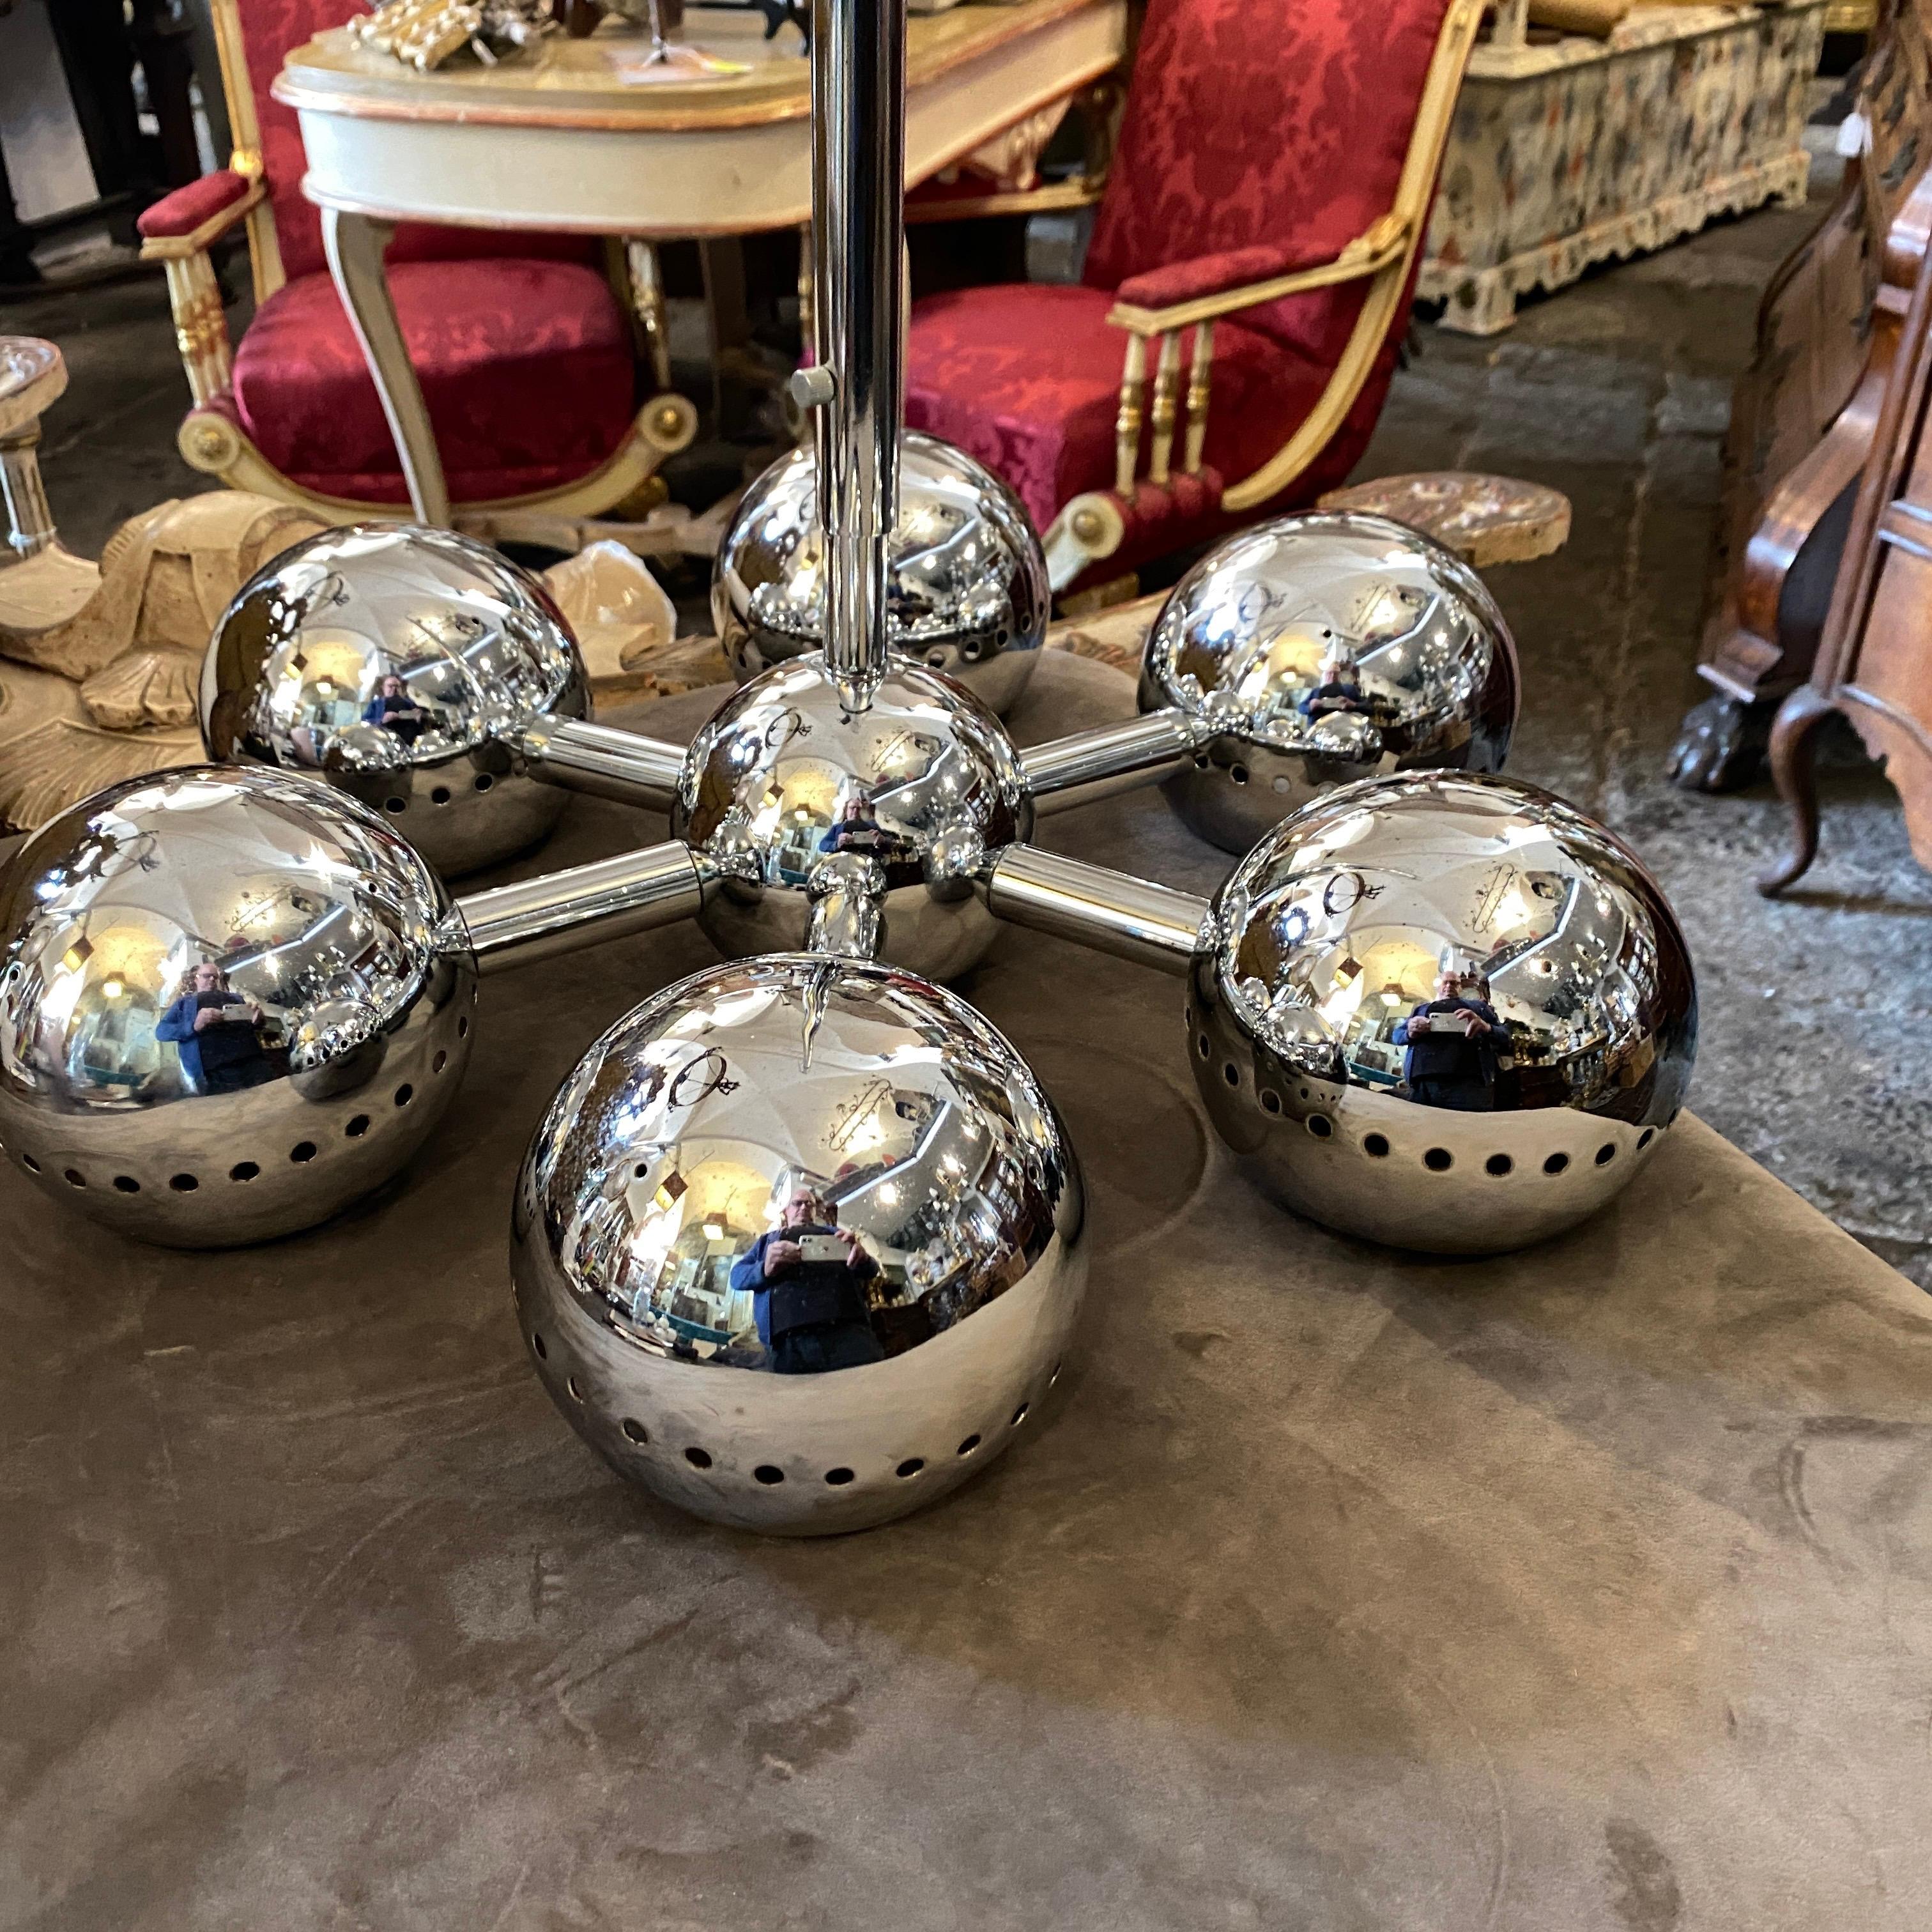 A midcentury chandelier made in Italy, chromed metal is in perfect conditions, the stem is extendable. It works 110-240 volts and needs regular bulbs.